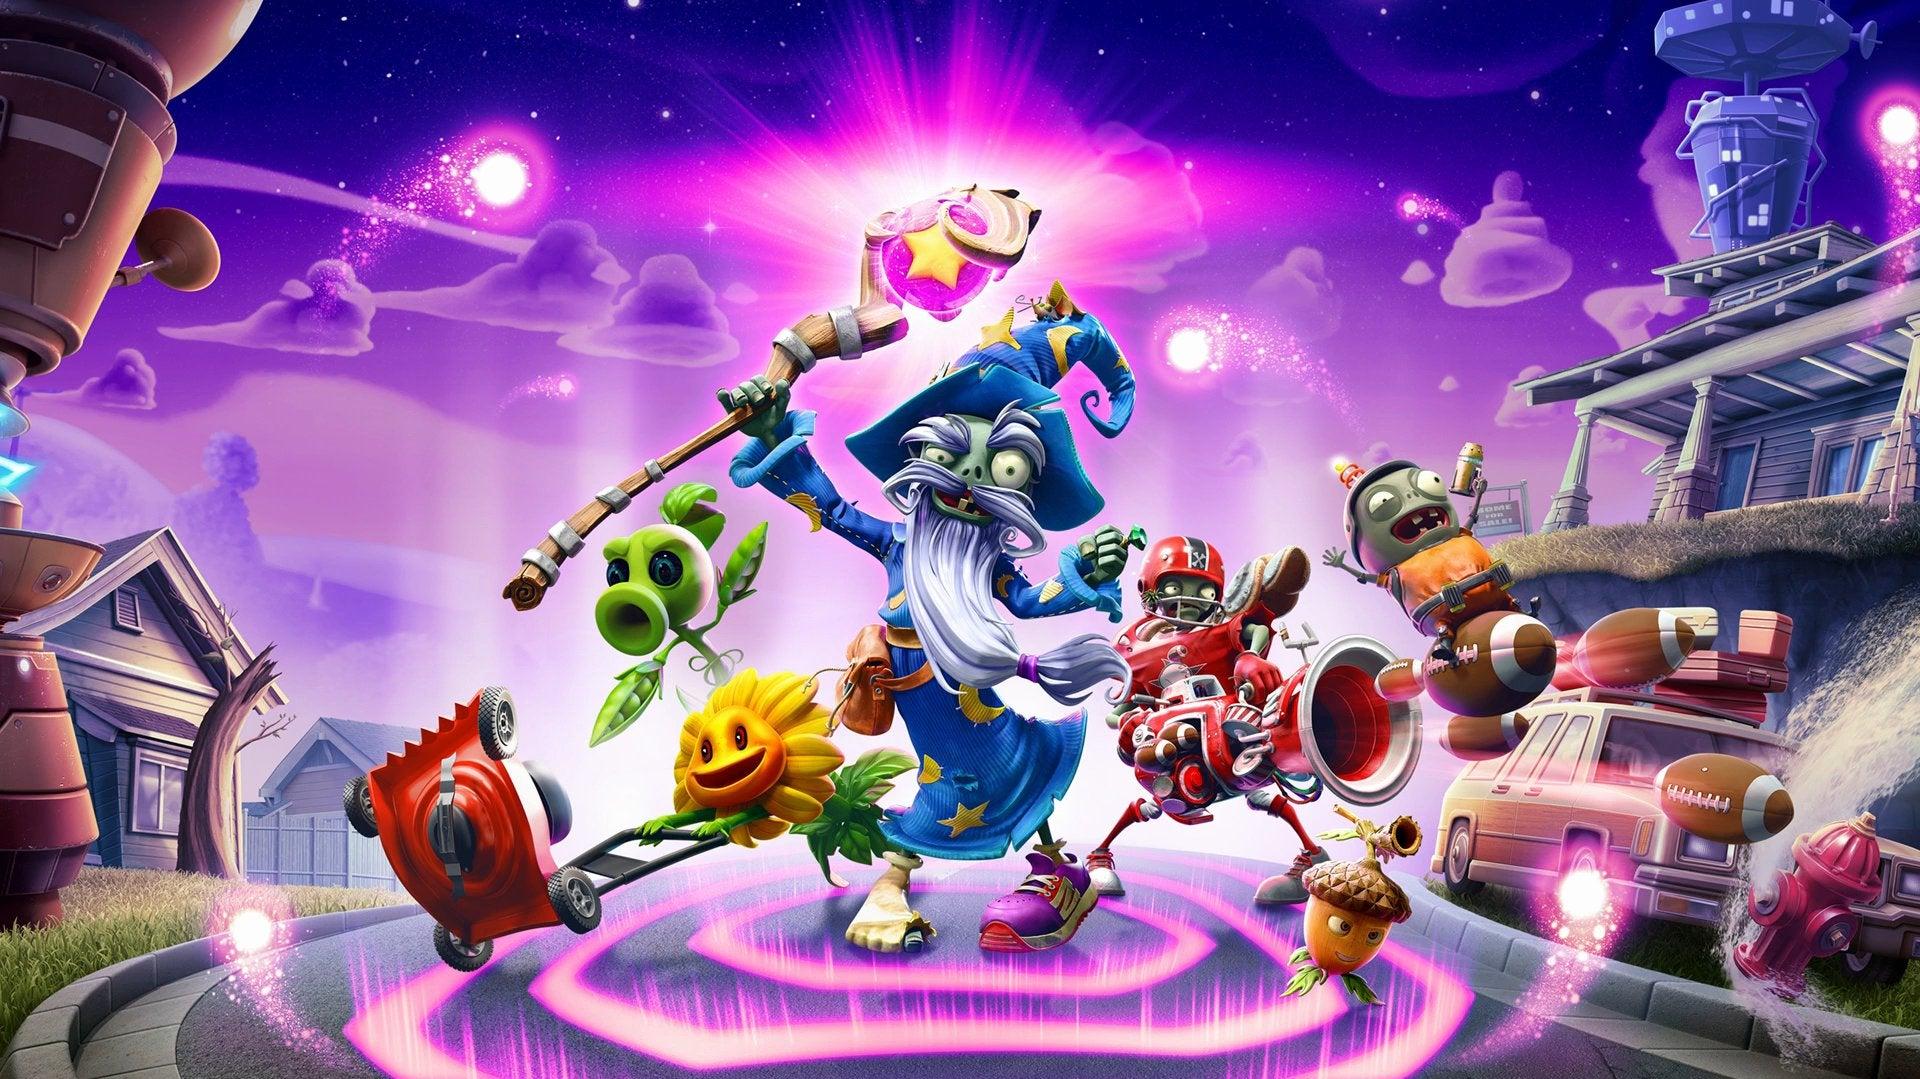 Image] Plants vs Zombies BFN new title art featuring Wizard zombie